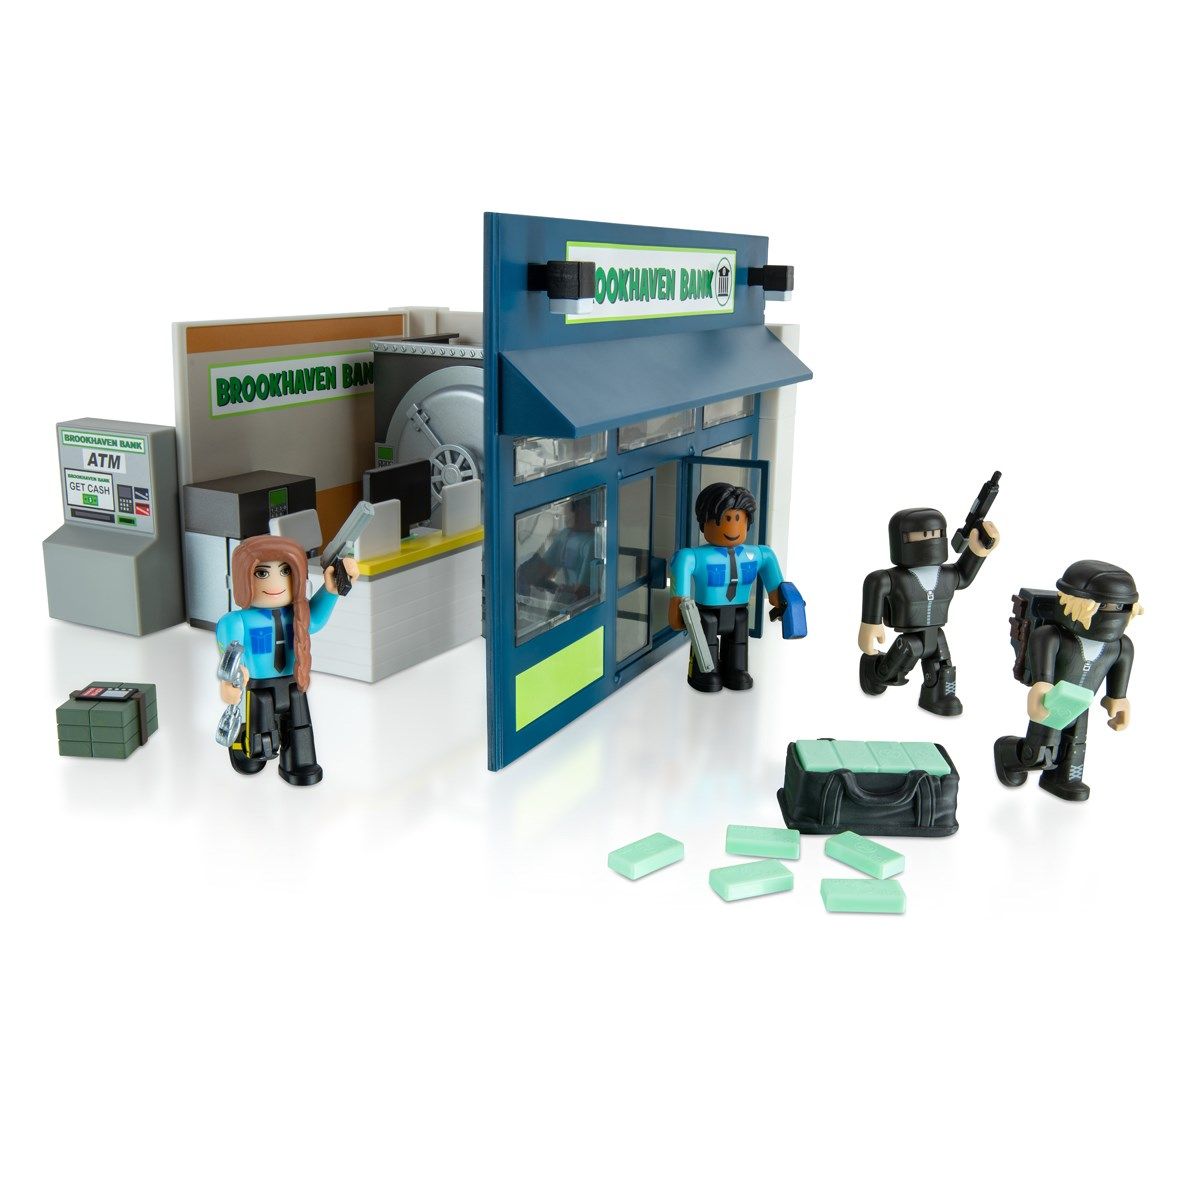 Roblox - Deluxe Playset - Brookhaven Bank (980-0689)